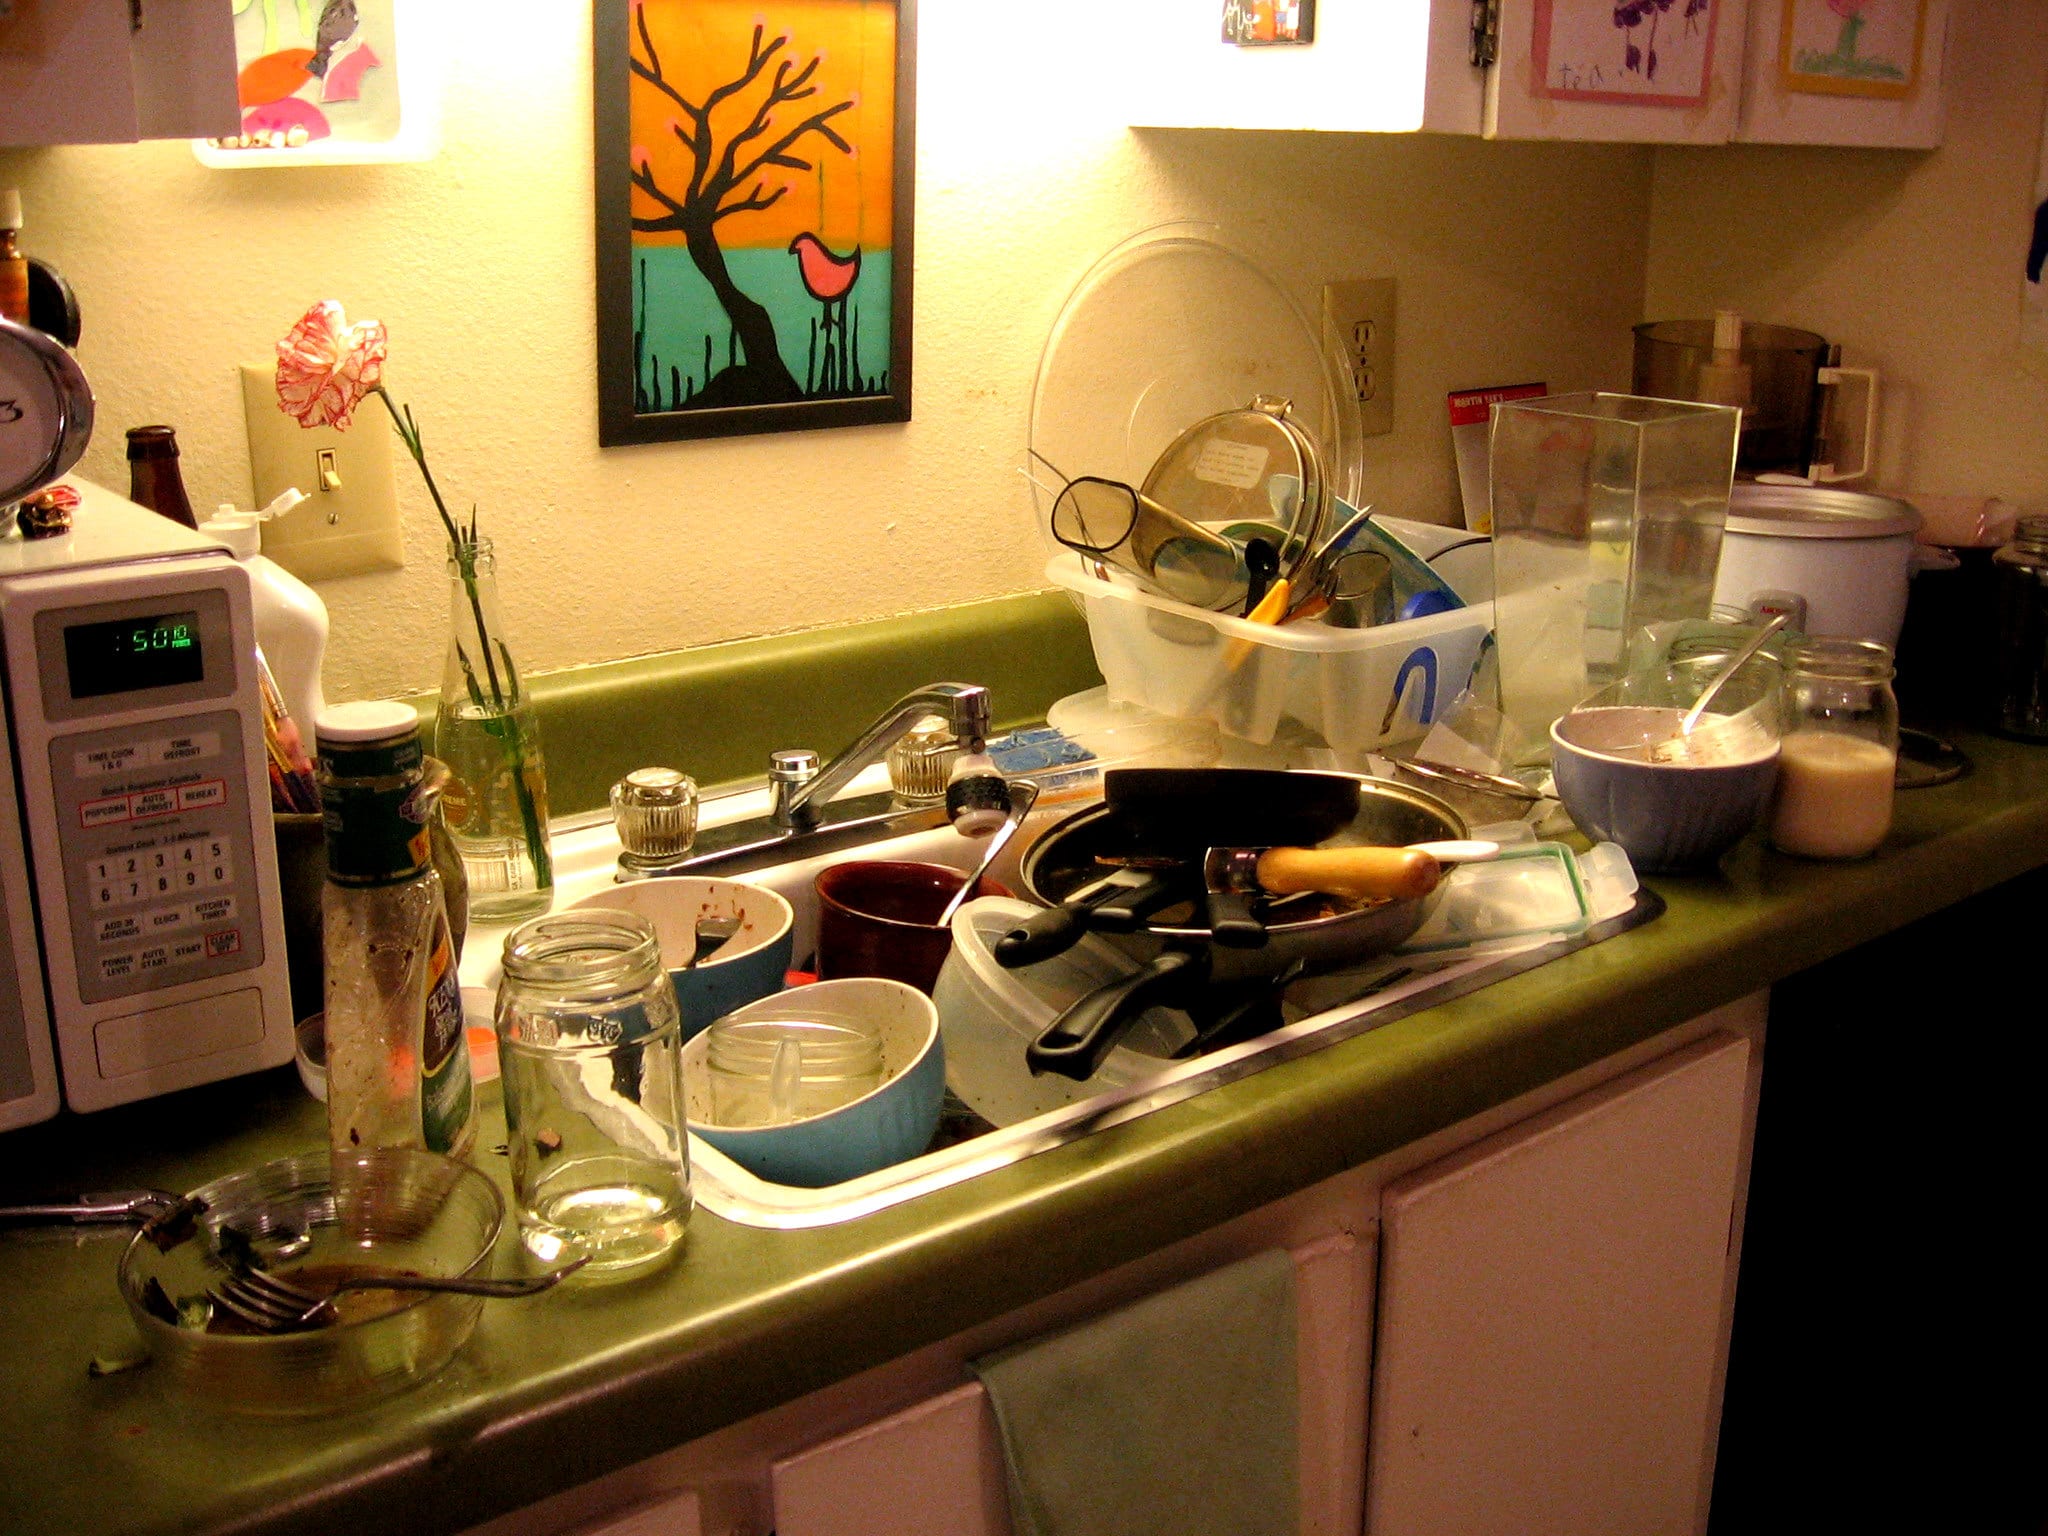 15 of the Worst Kitchen Designs You Might Ever See